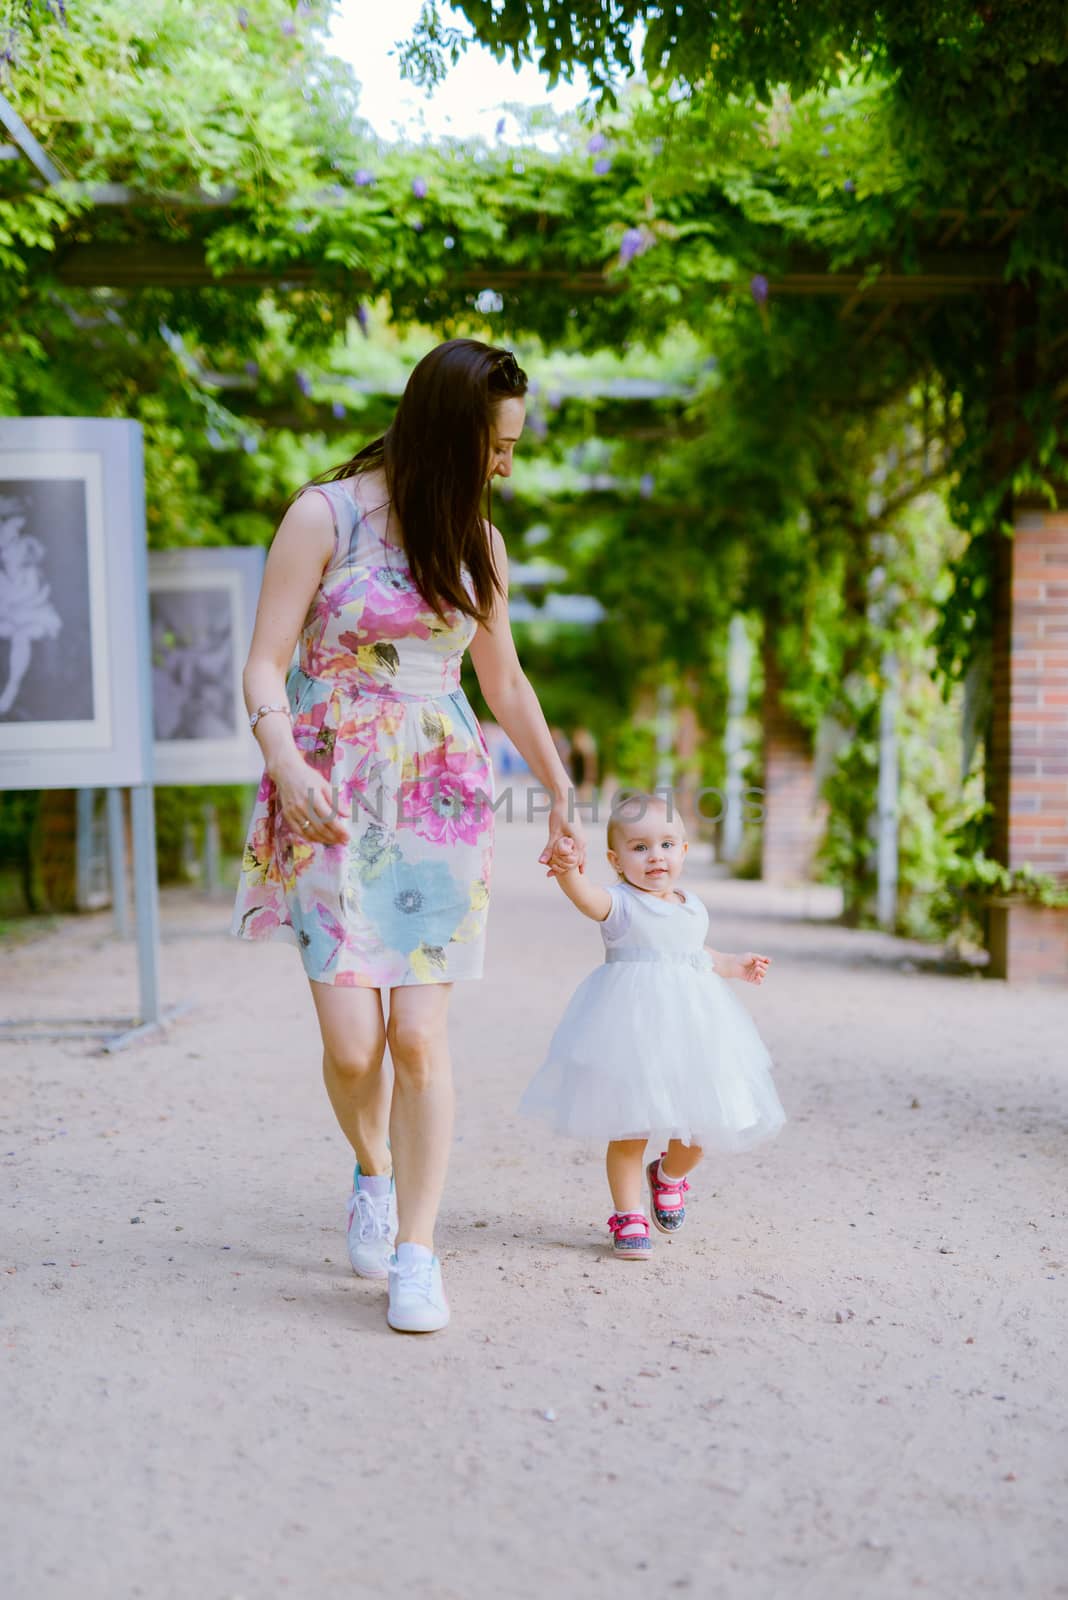 Happy mother and daughter in the park. Beauty nature scene with  by Brejeq